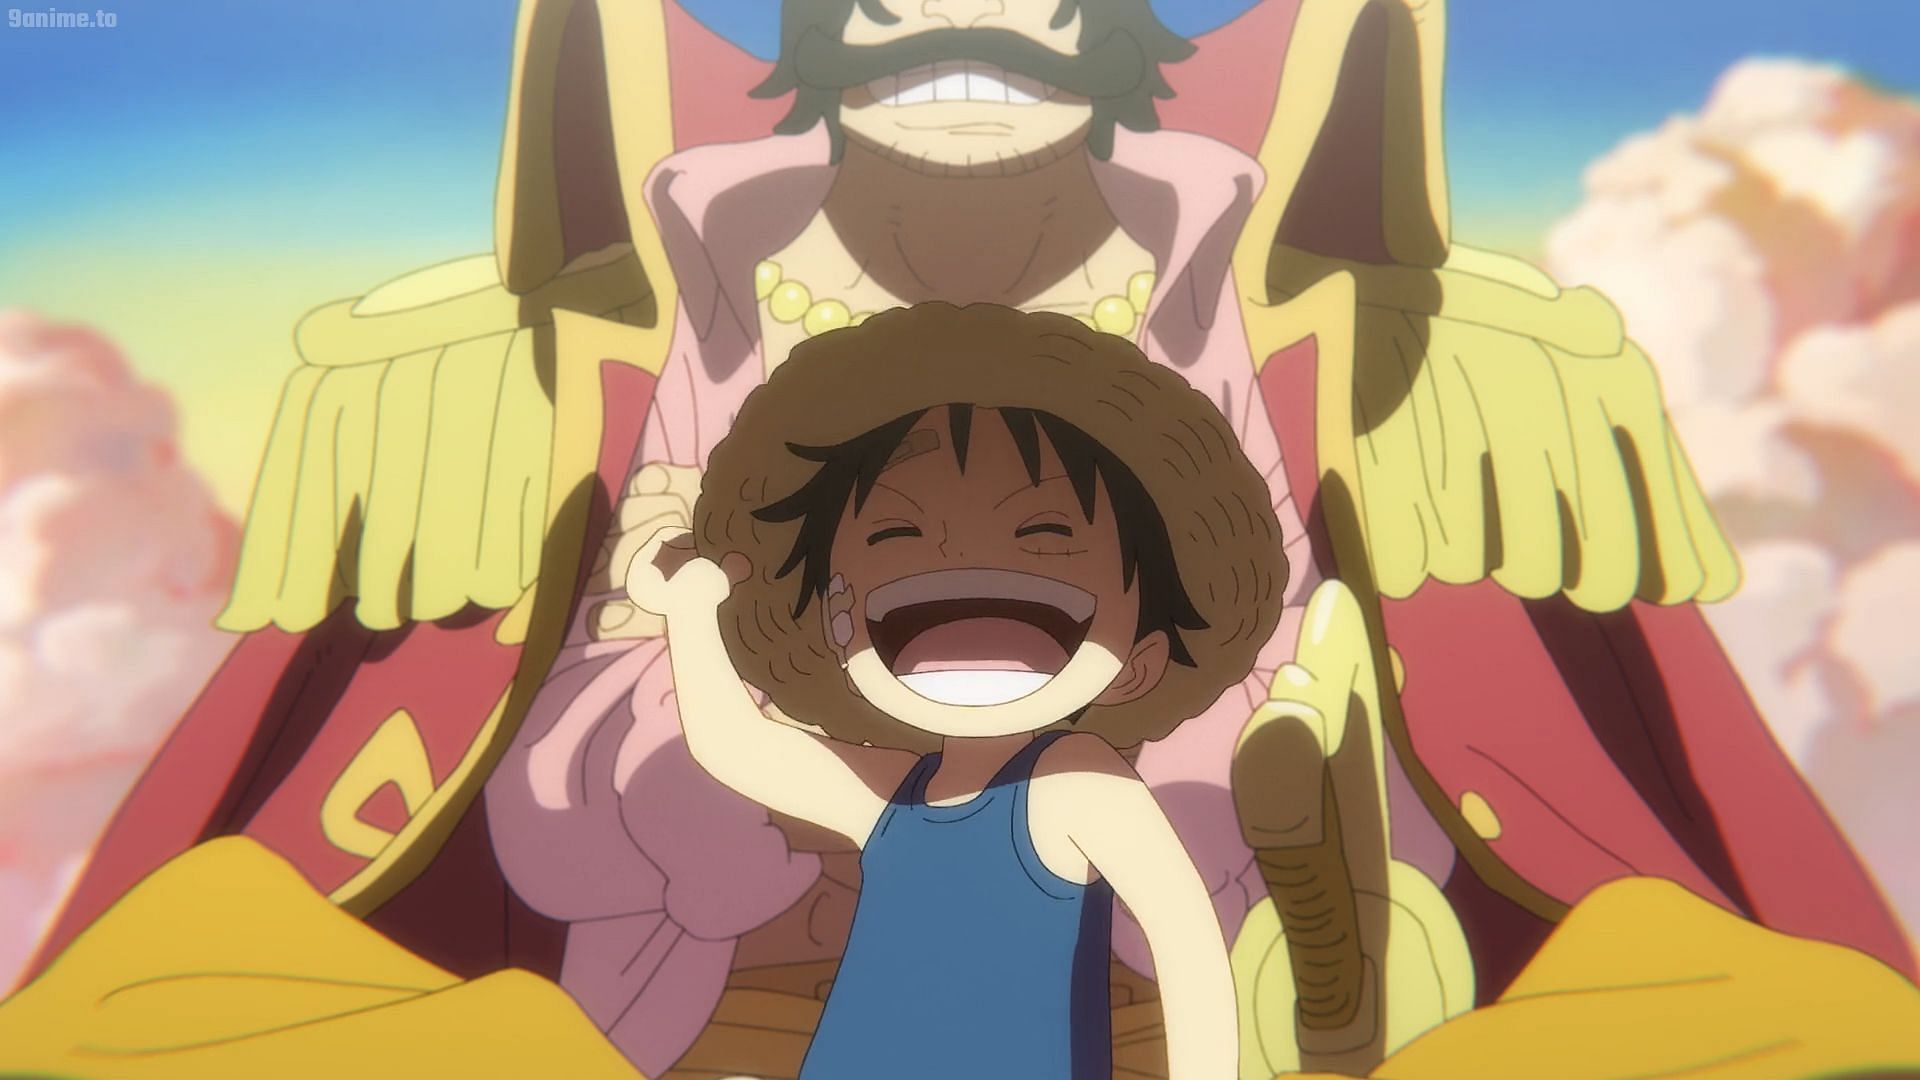 Luffy Epic Entrance - One Piece - Episode 1015 